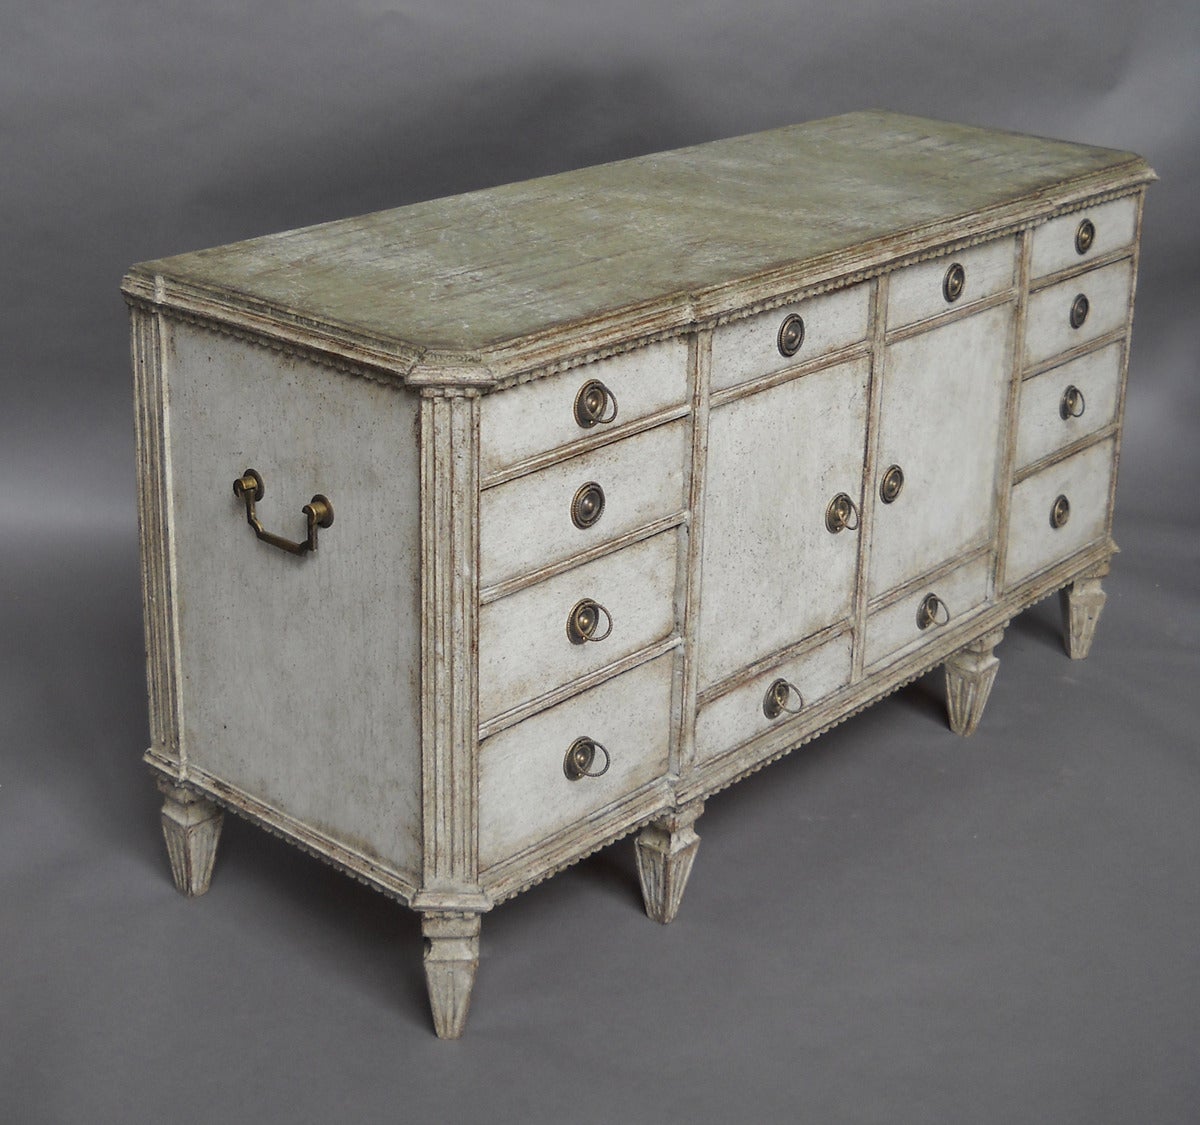 Early Gustavian sideboard, Sweden, circa 1790, with later white paint, green top and brass hardware. A bank of four drawers under dentil molding span the top, with a bank of three graduated drawers on either side of a central storage compartment.